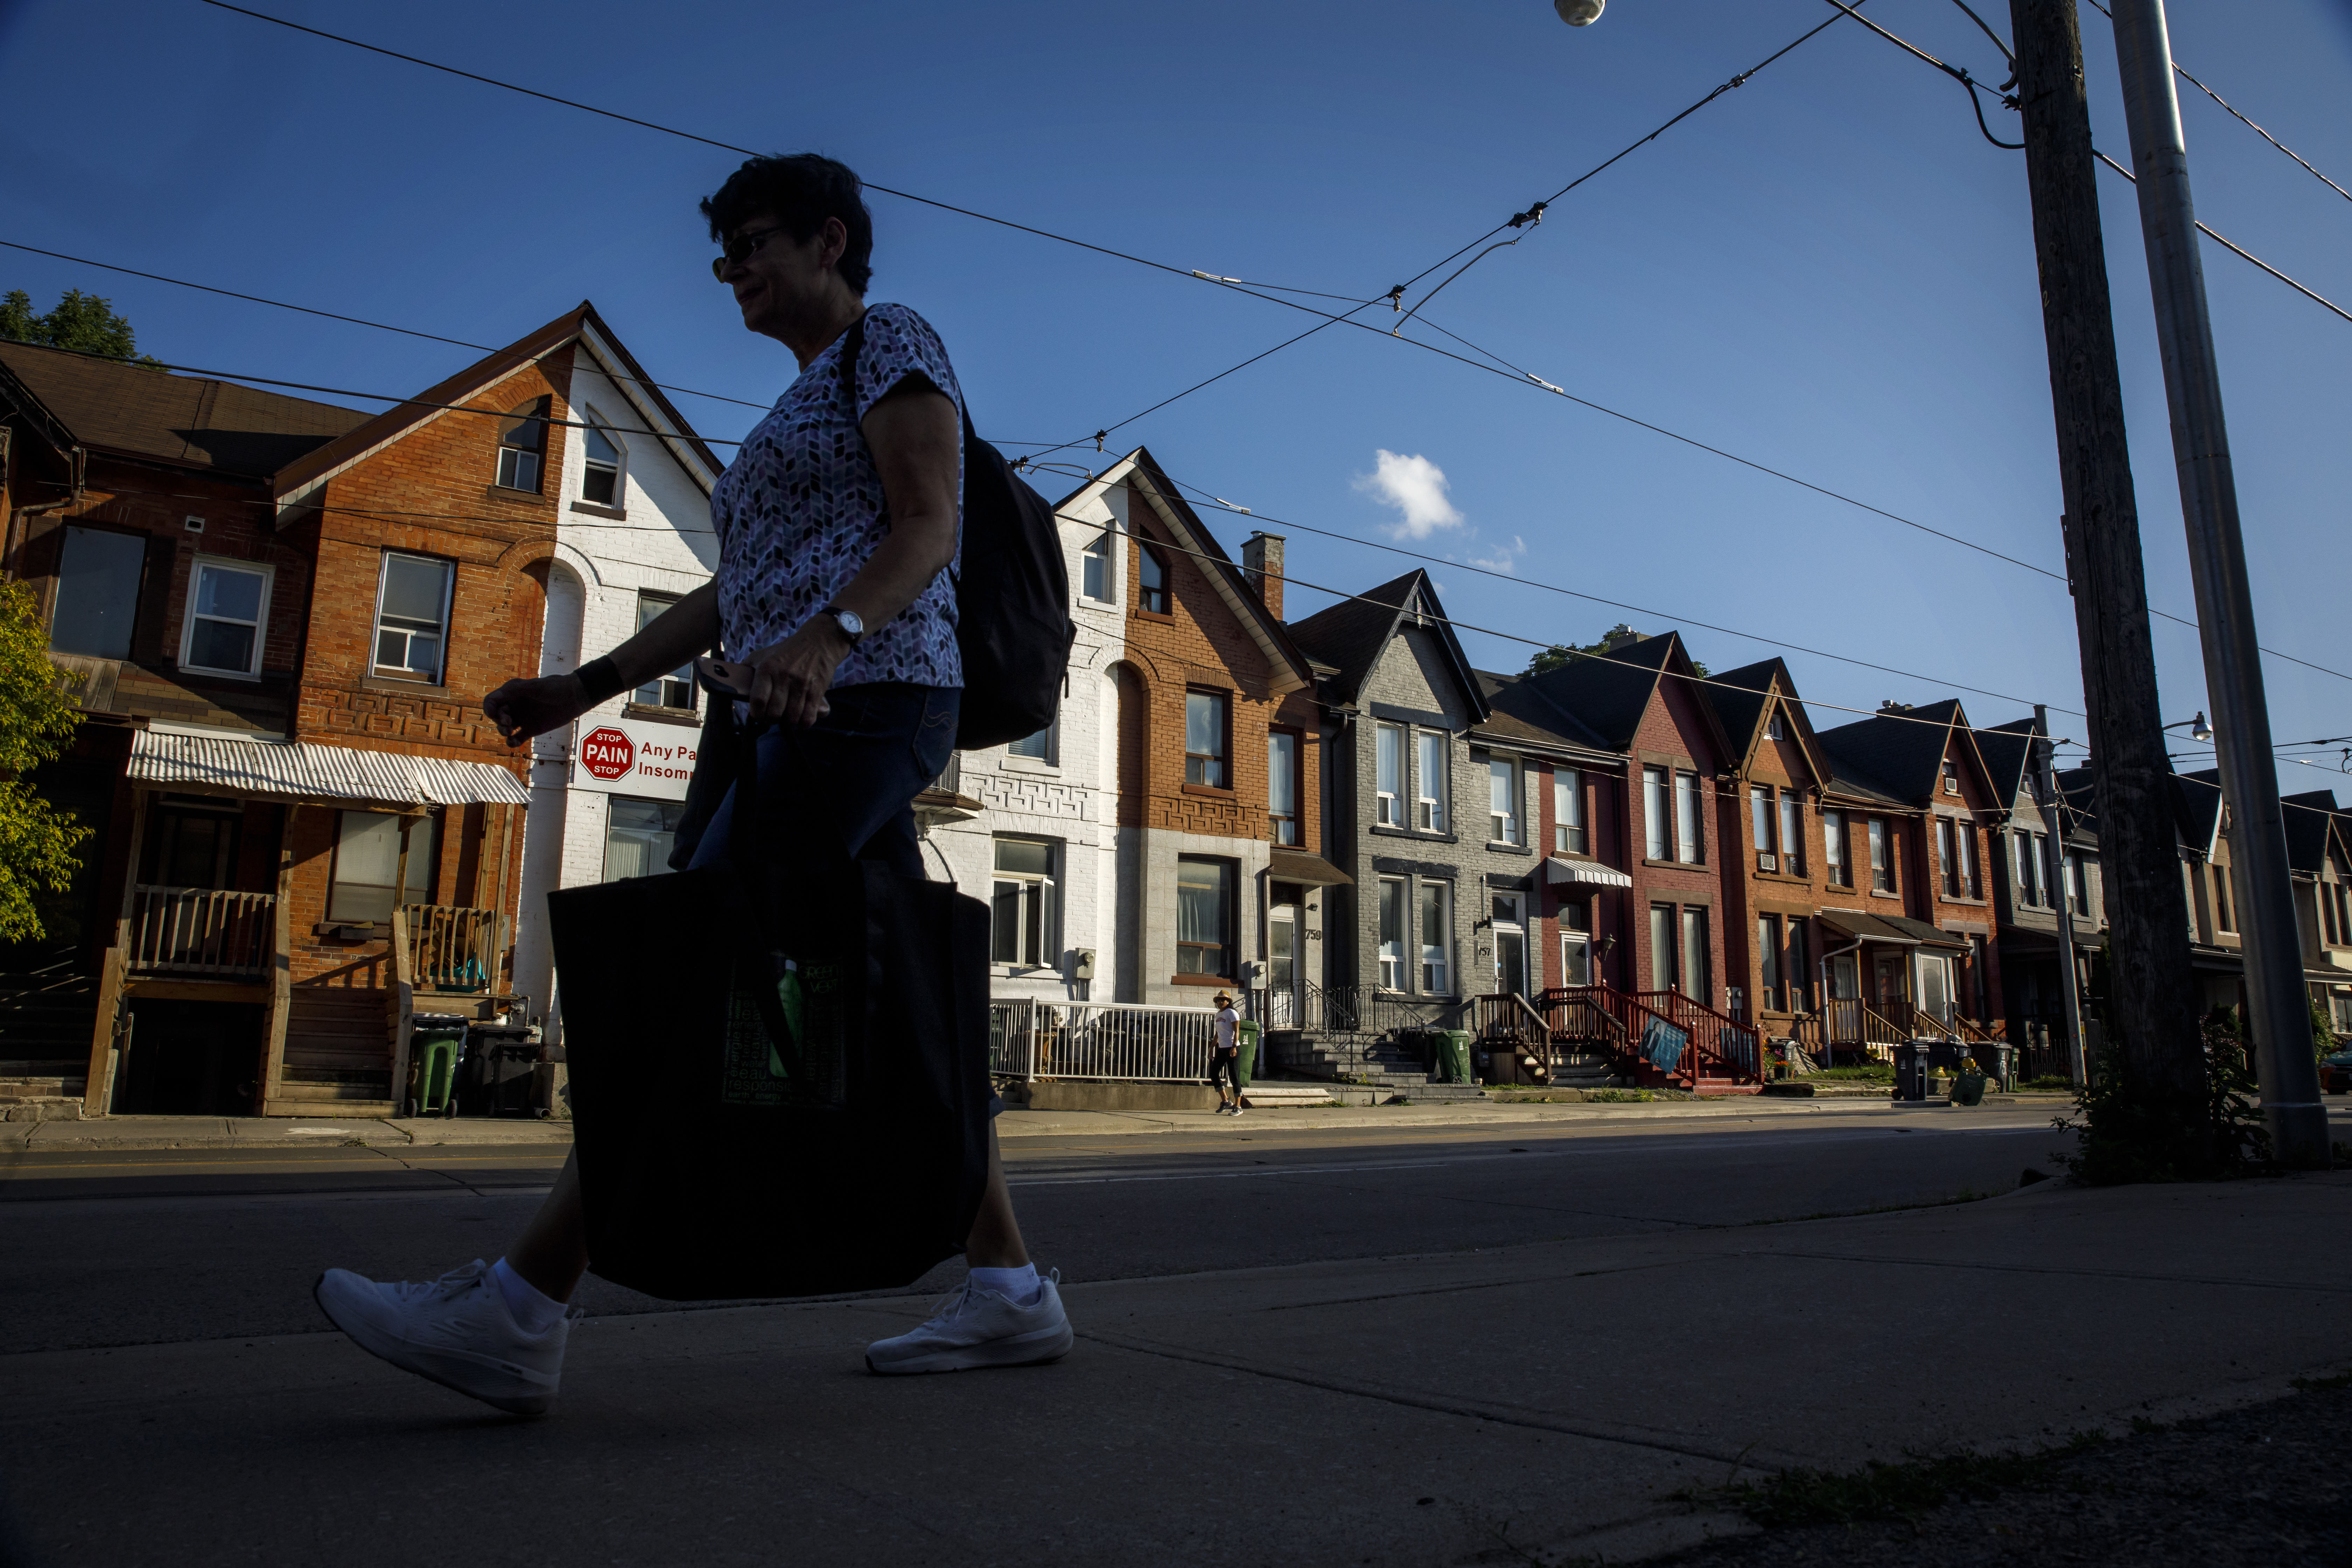 Affordability issues ‘casting a shadow’ over young Canadians’ economic futures